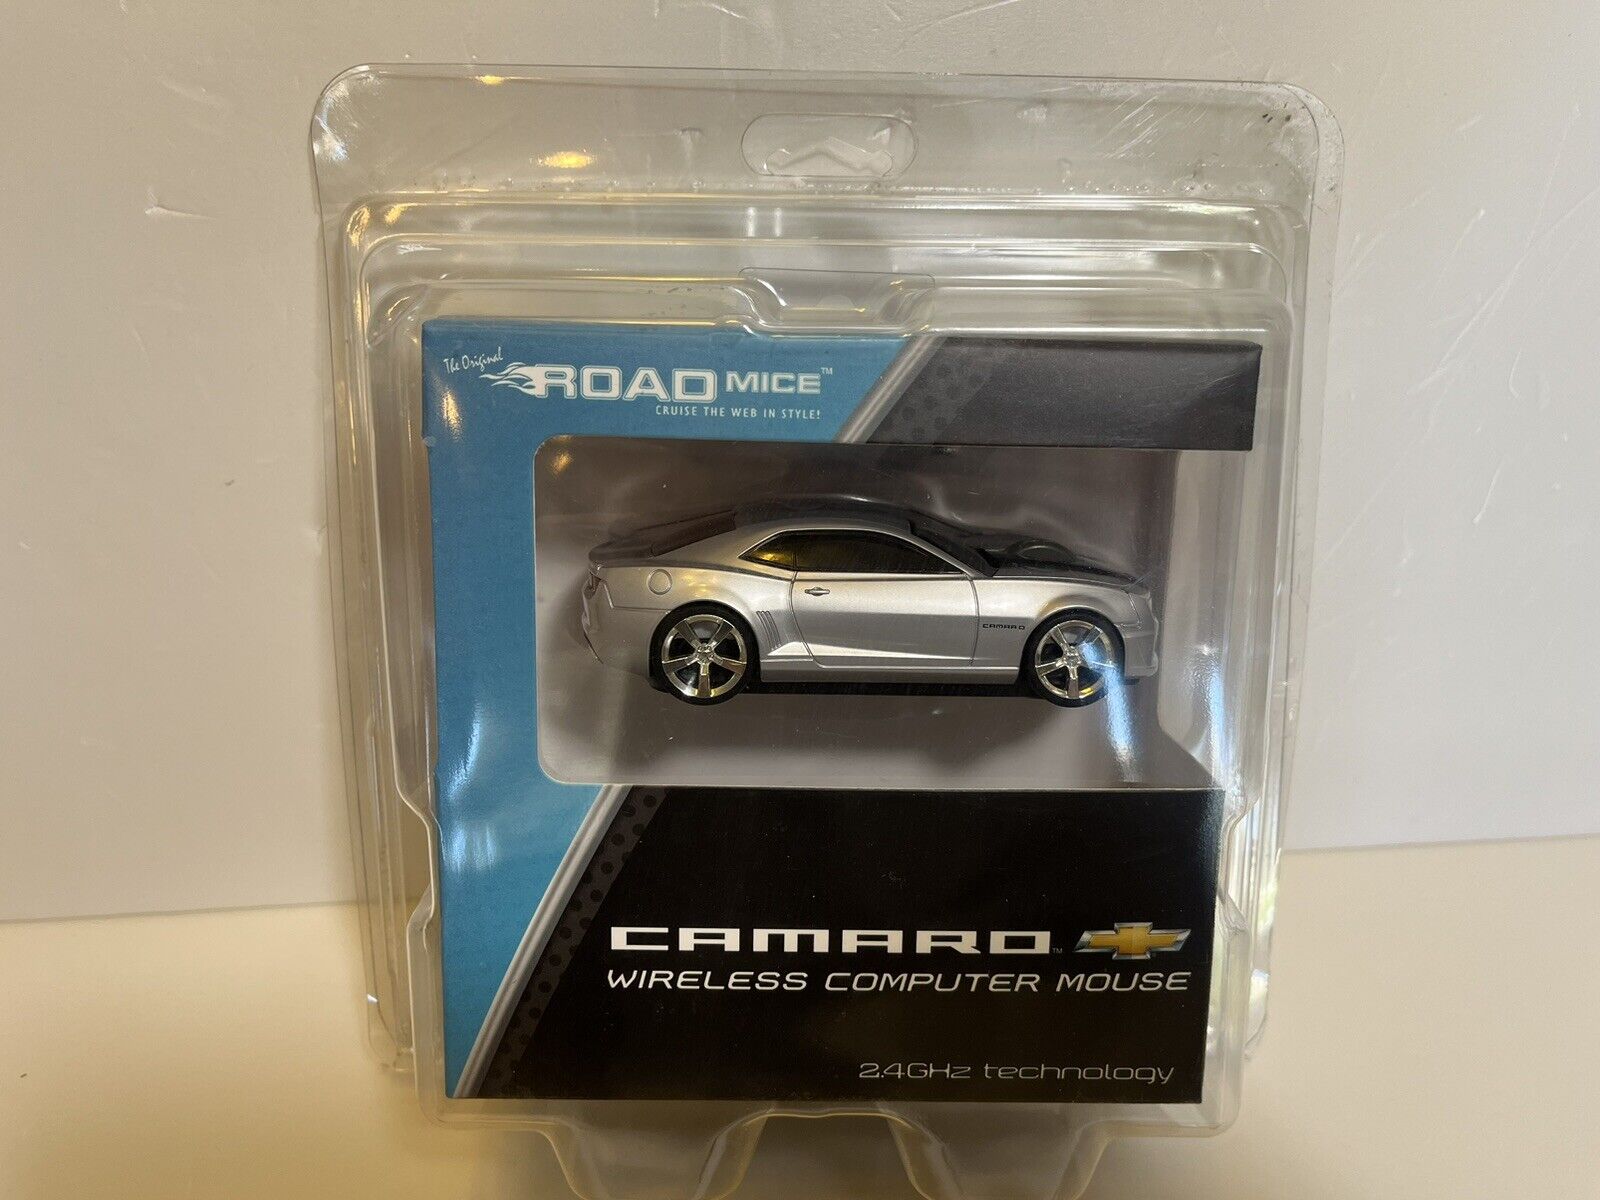 Road Mice Chevrolet Camaro 2.4GHz Wireless Optical Scroll Mouse - New In Box